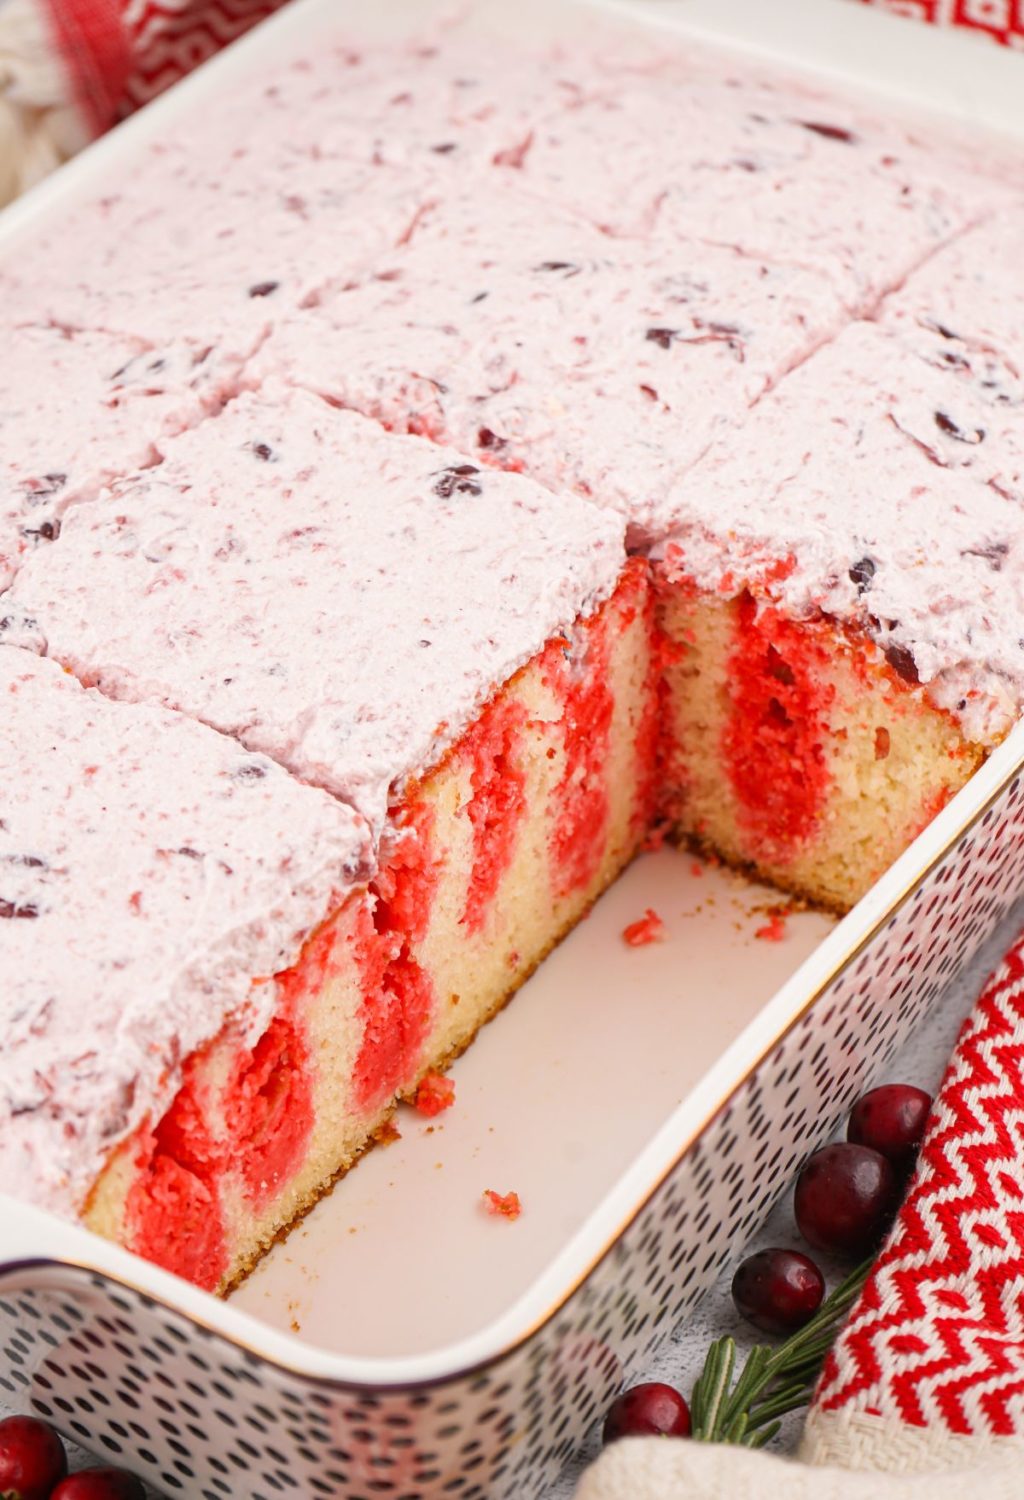 A red and white cake with cranberries on top.